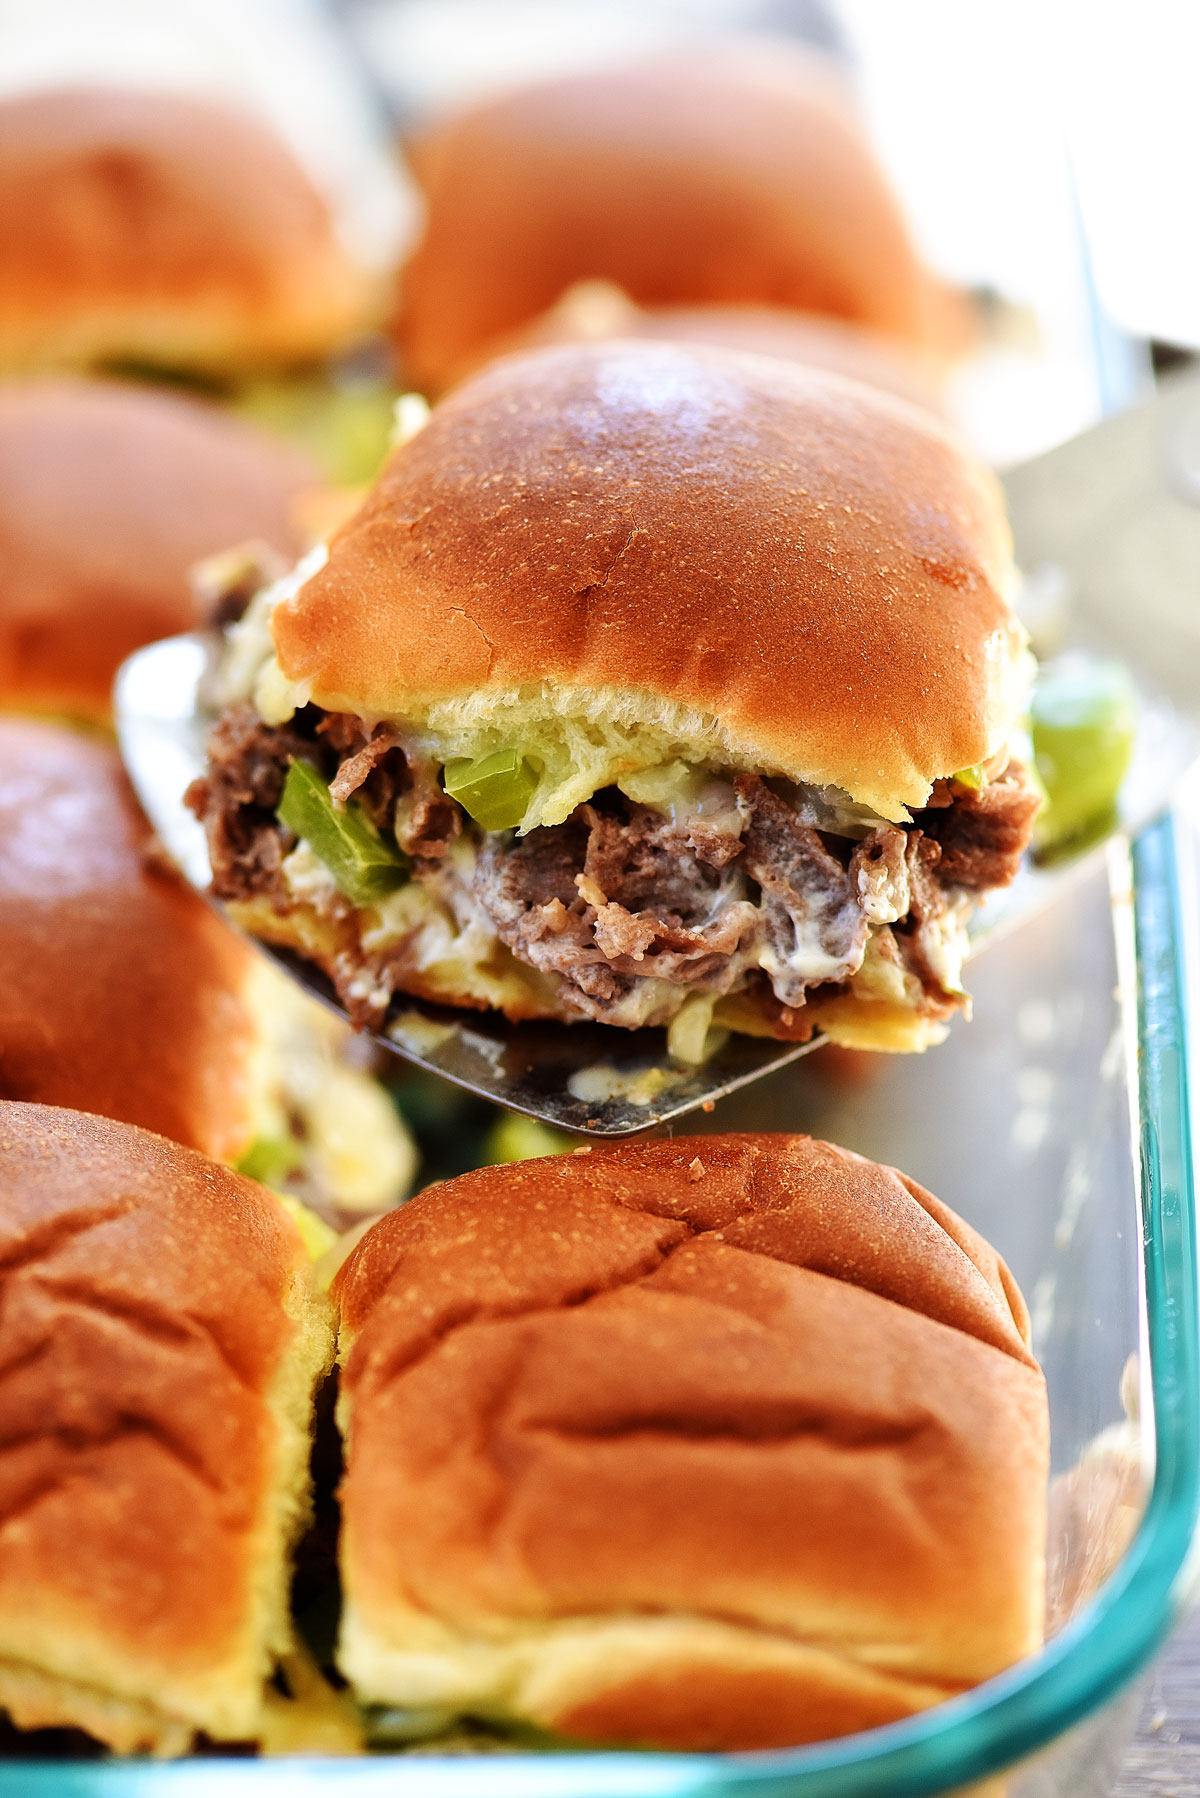 Cheesesteak Sliders are filled with warm pieces of steak, gooey cheese, peppers and onion. Life-in-the-Lofthouse.com